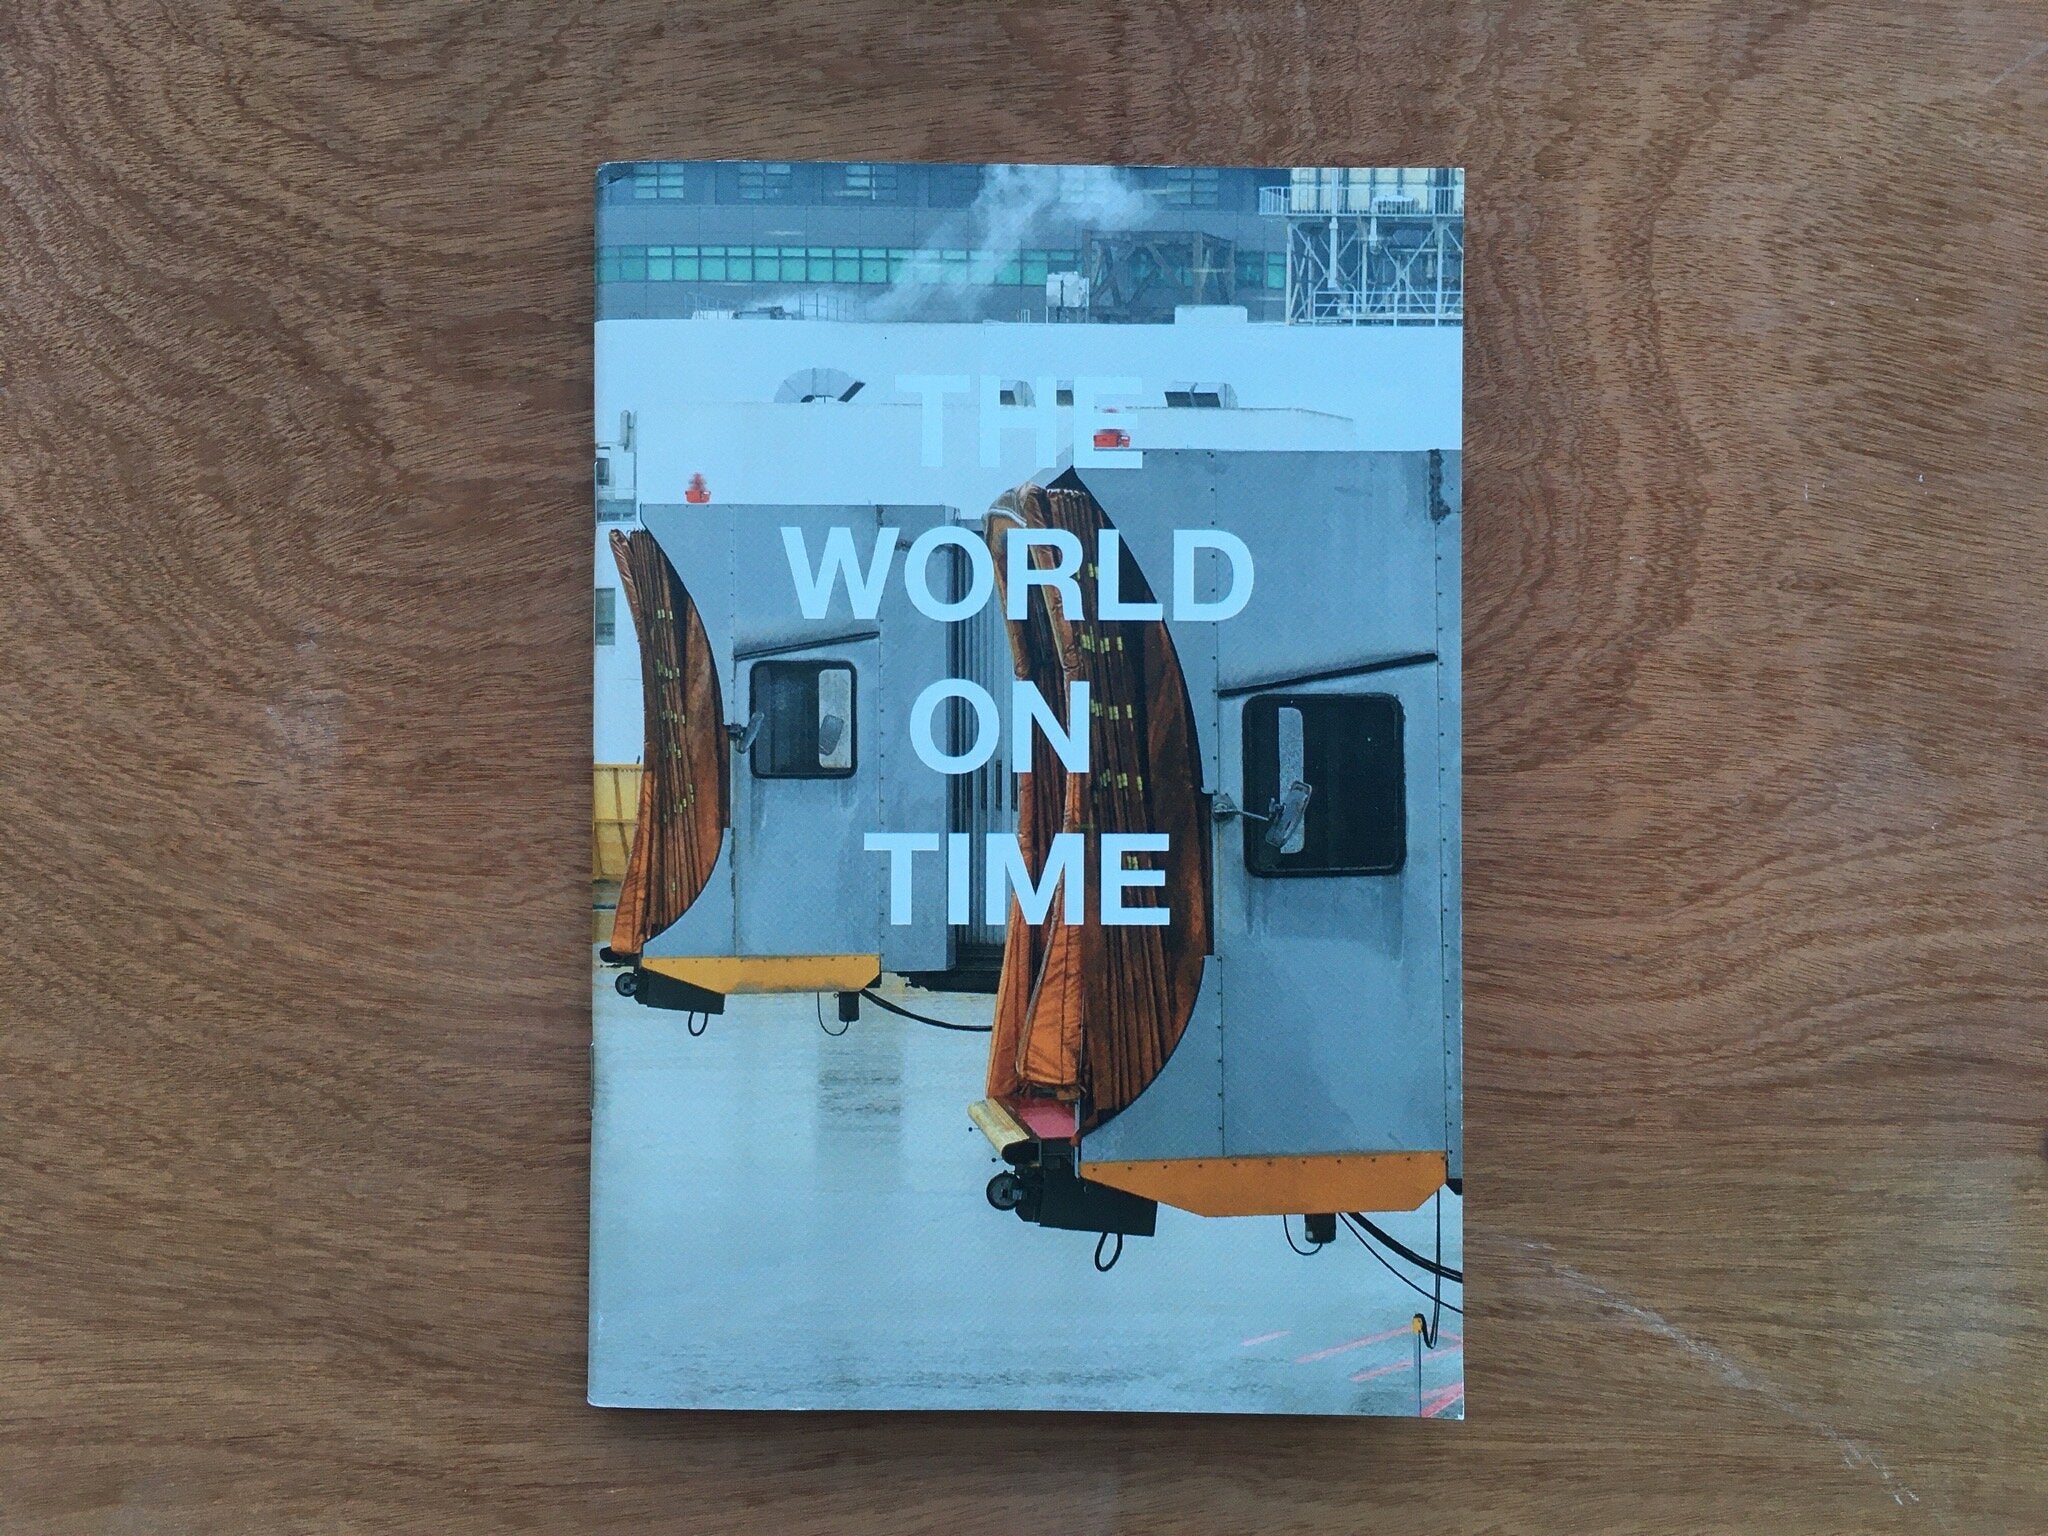 THE WORLD ON TIME by Declan Driver